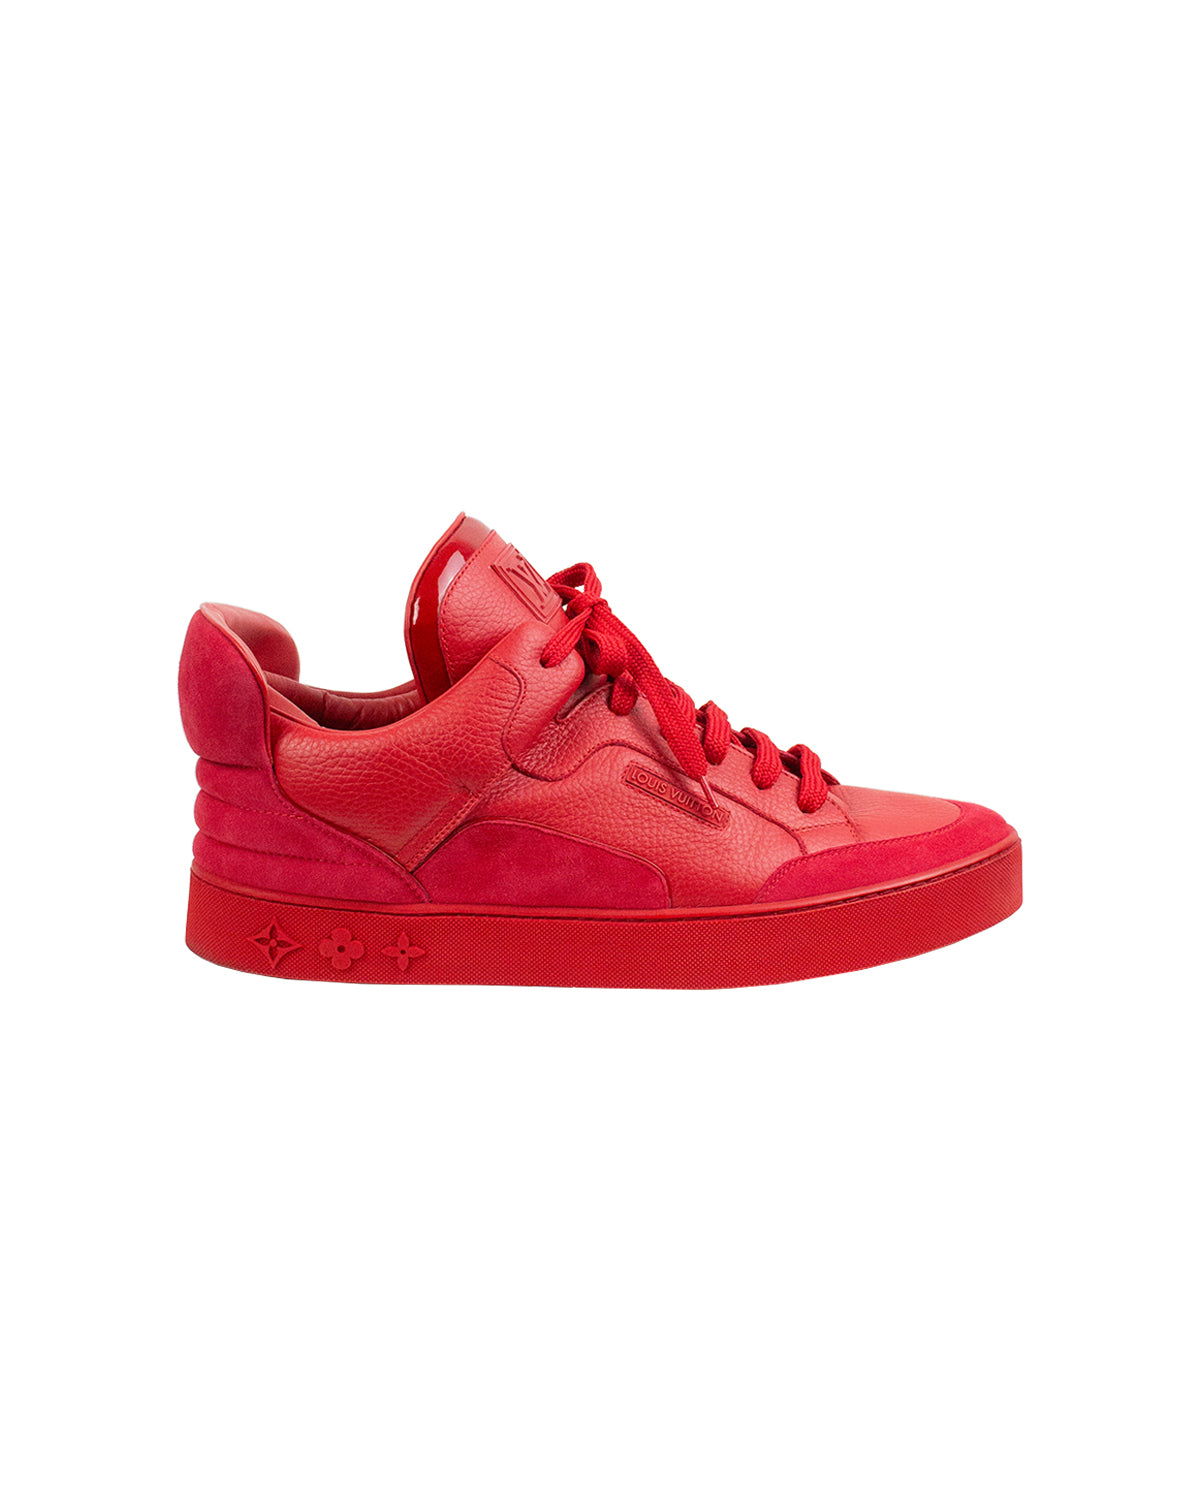 Louis Vuitton Kanye West Red Dons Runway Size LV 9 